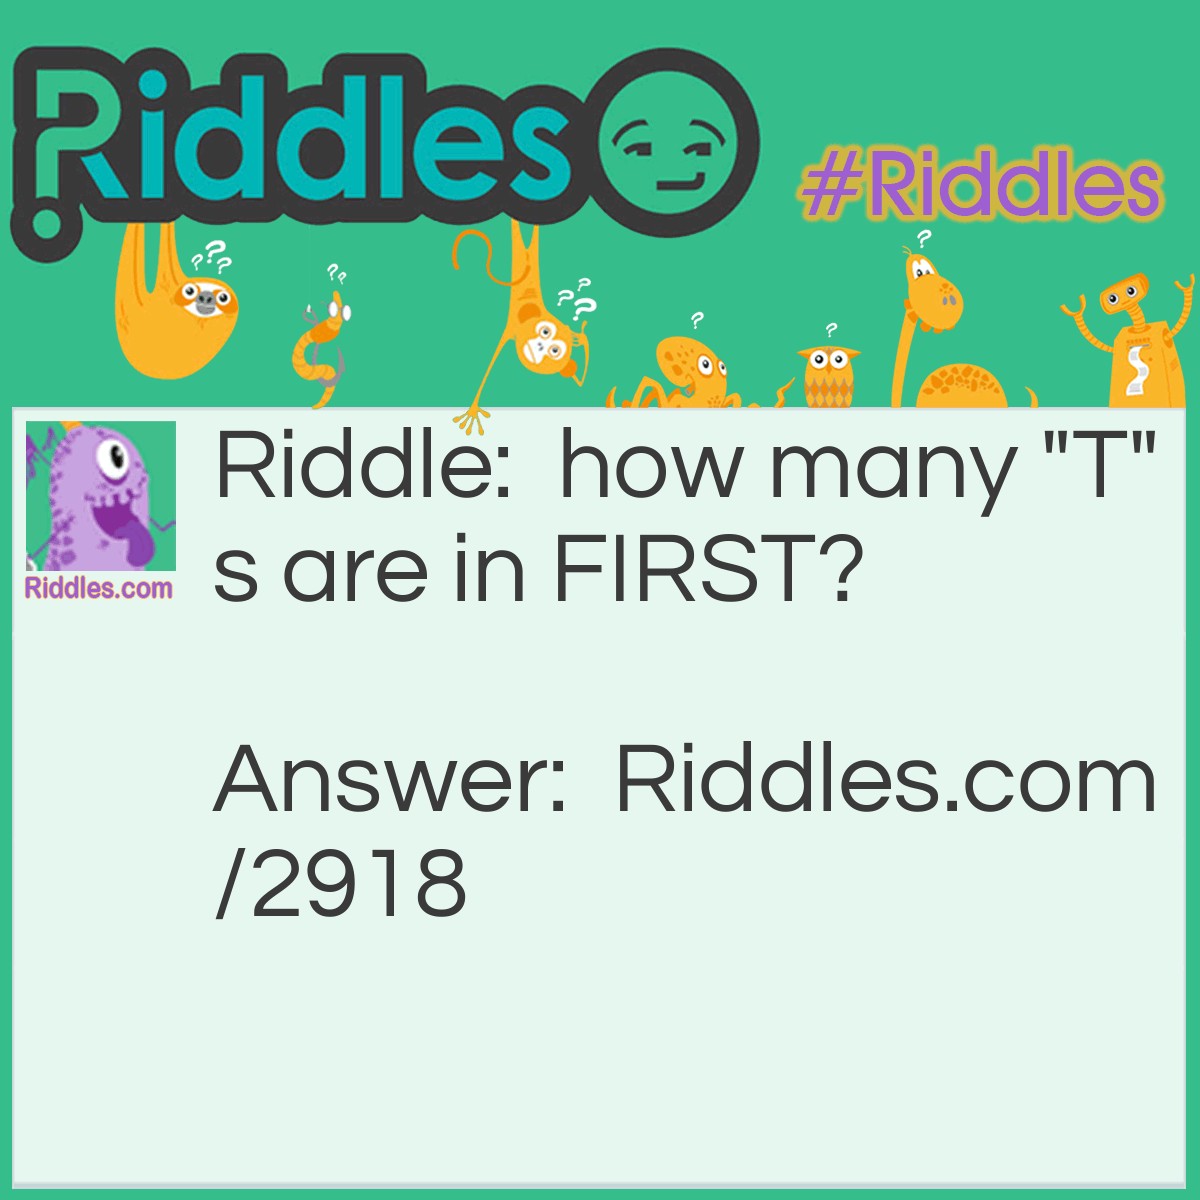 Riddle: How many "T"s are in FIRST? Answer: 4 (It, fit, sit, "RIT").